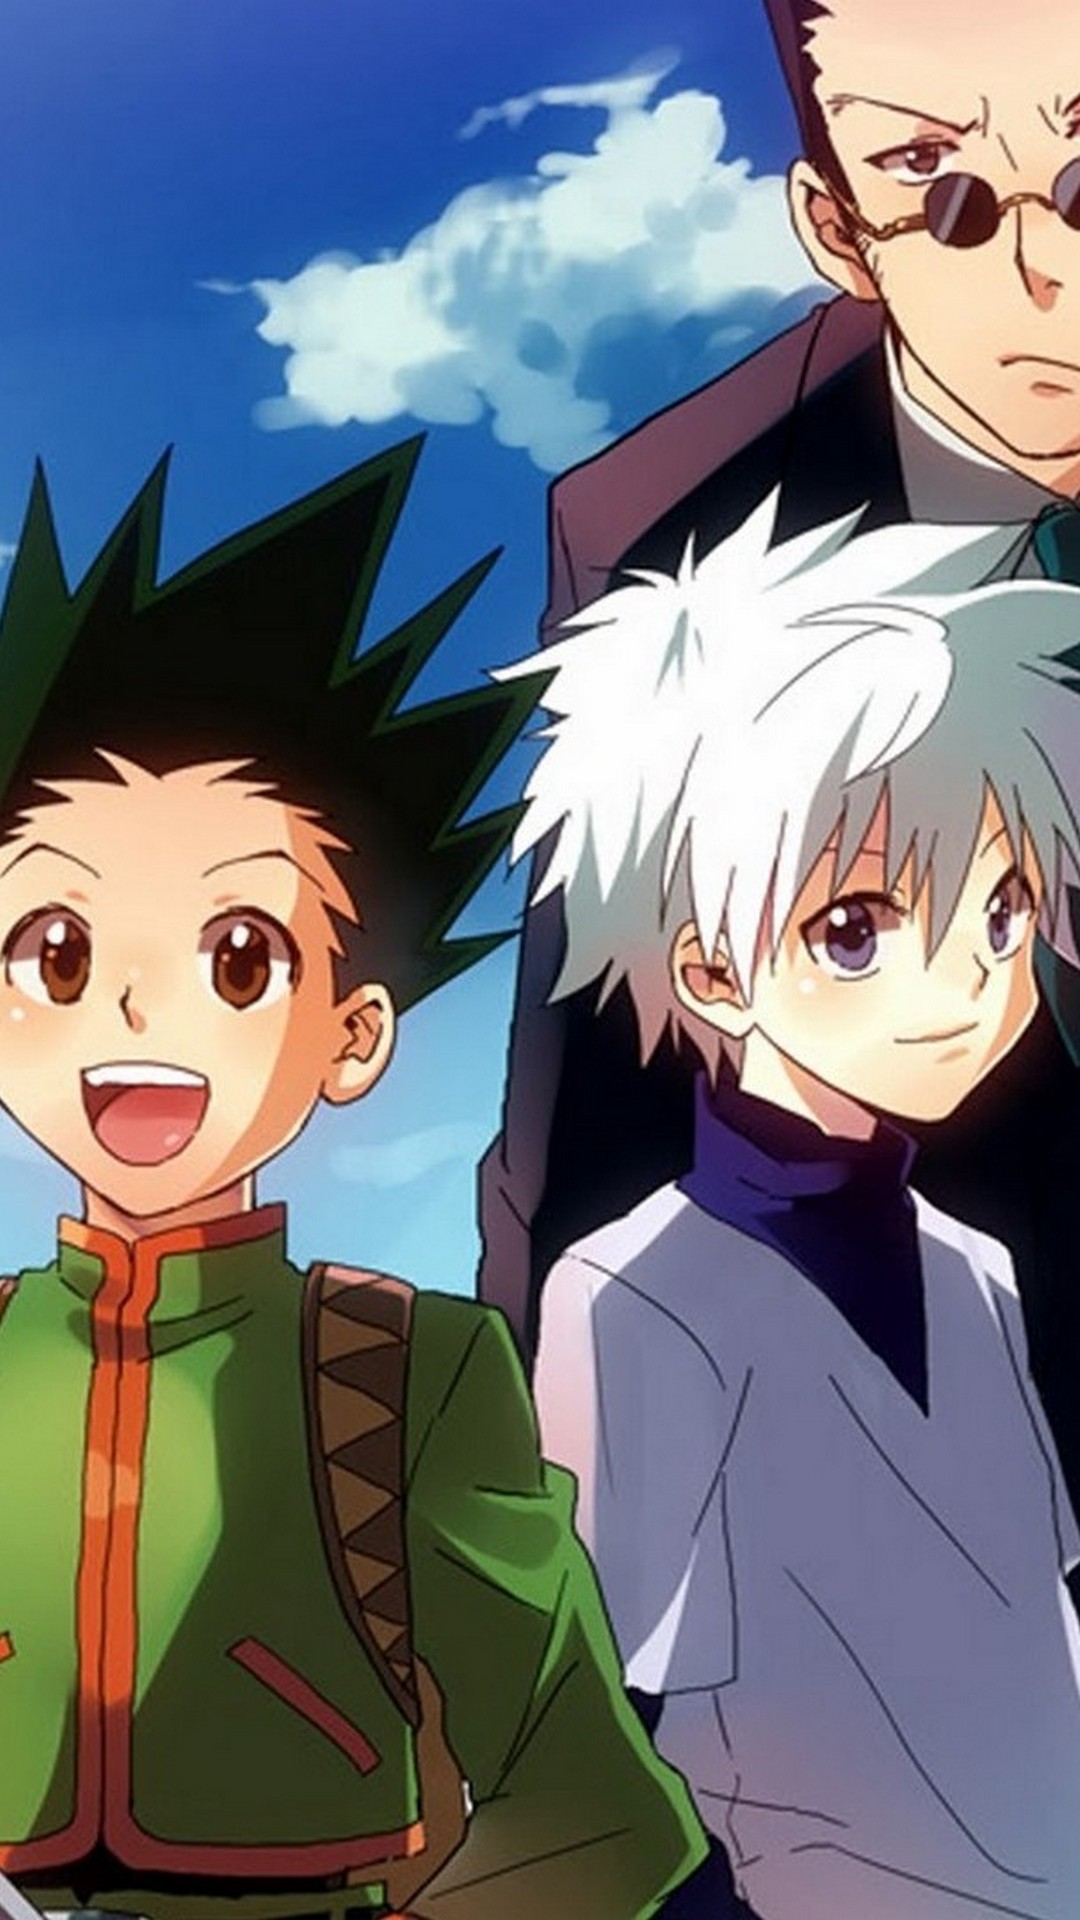 Gon And Killua iPhone 7 Wallpaper HD with high-resolution 1080x1920 pixel. Download all Mobile Wallpapers and Use them as wallpapers for your iPhone, Tablet, iPad, Android and other mobile devices